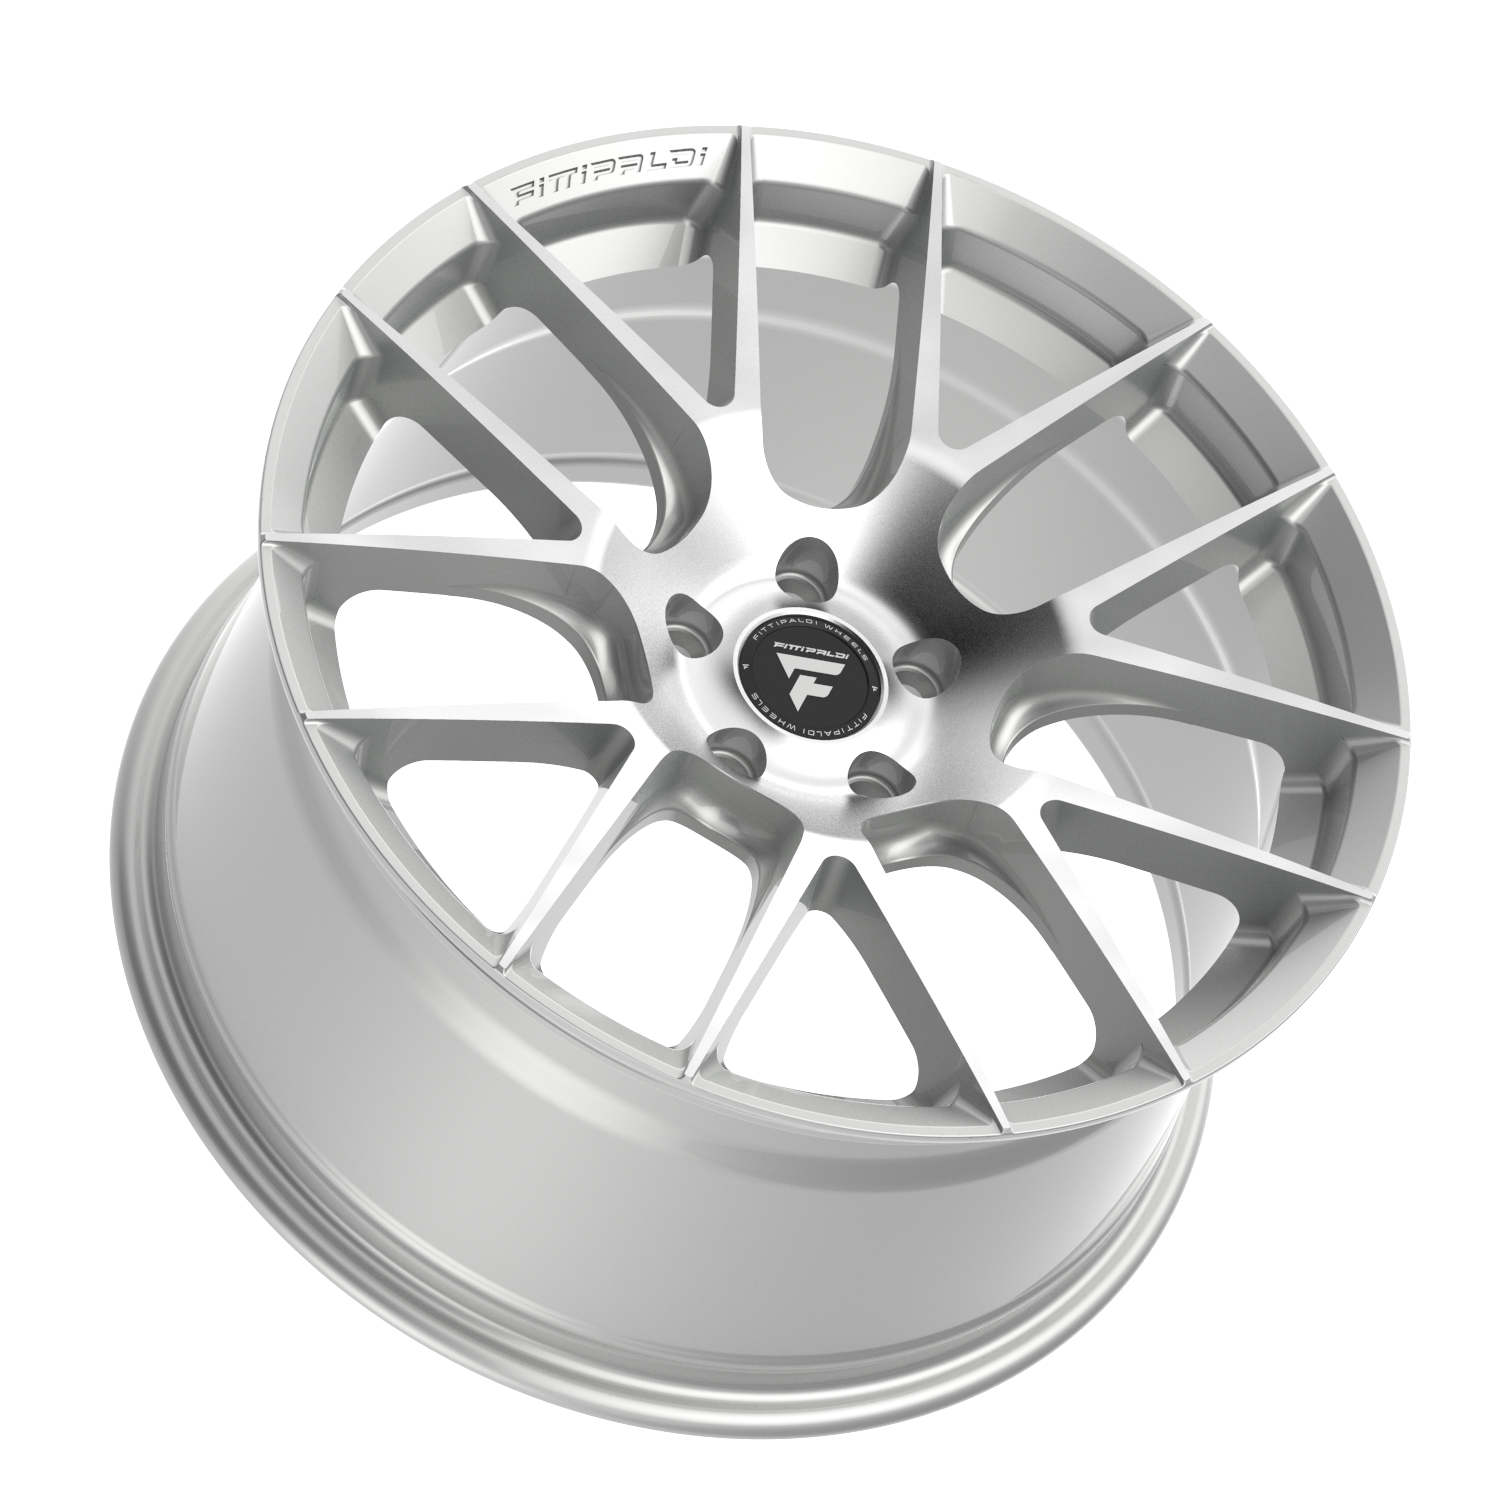 FITTIPALDI 360BS 19X9.5 +38 5X4.50 Brushed Silver